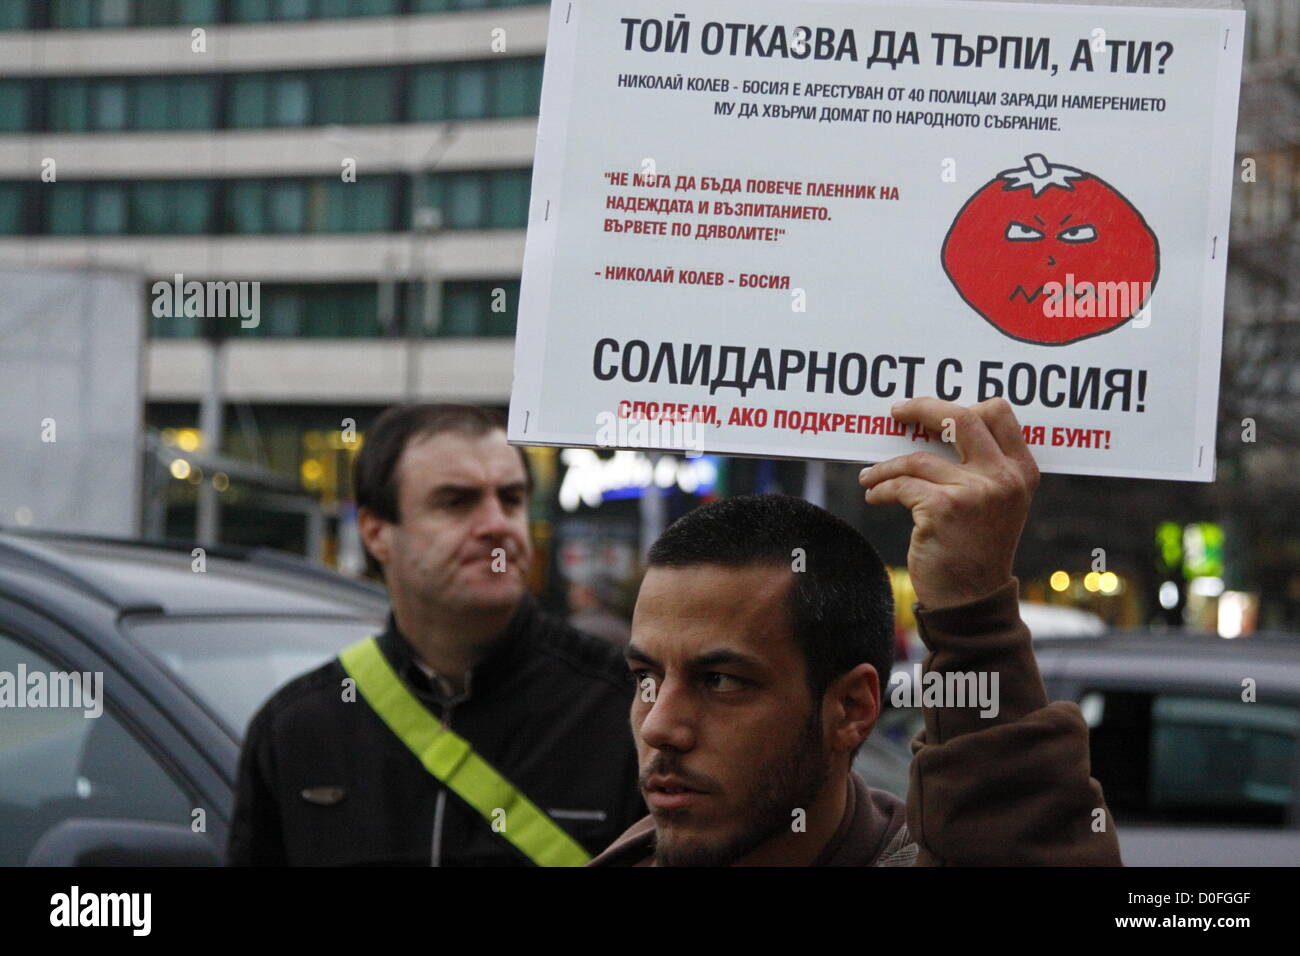 Sofia, Bulgaria; 24th November, 2012. Demonstrator holding aup a sign with the tomato, symbol of the new Bulgarian anti-establishment movement 'Tomato Revolution'. The sign also describes the arrest of dissident Nikolay Kolev by 40 police officers four days earlier. Credit:  Johann Brandstatter / Alamy Live News Stock Photo